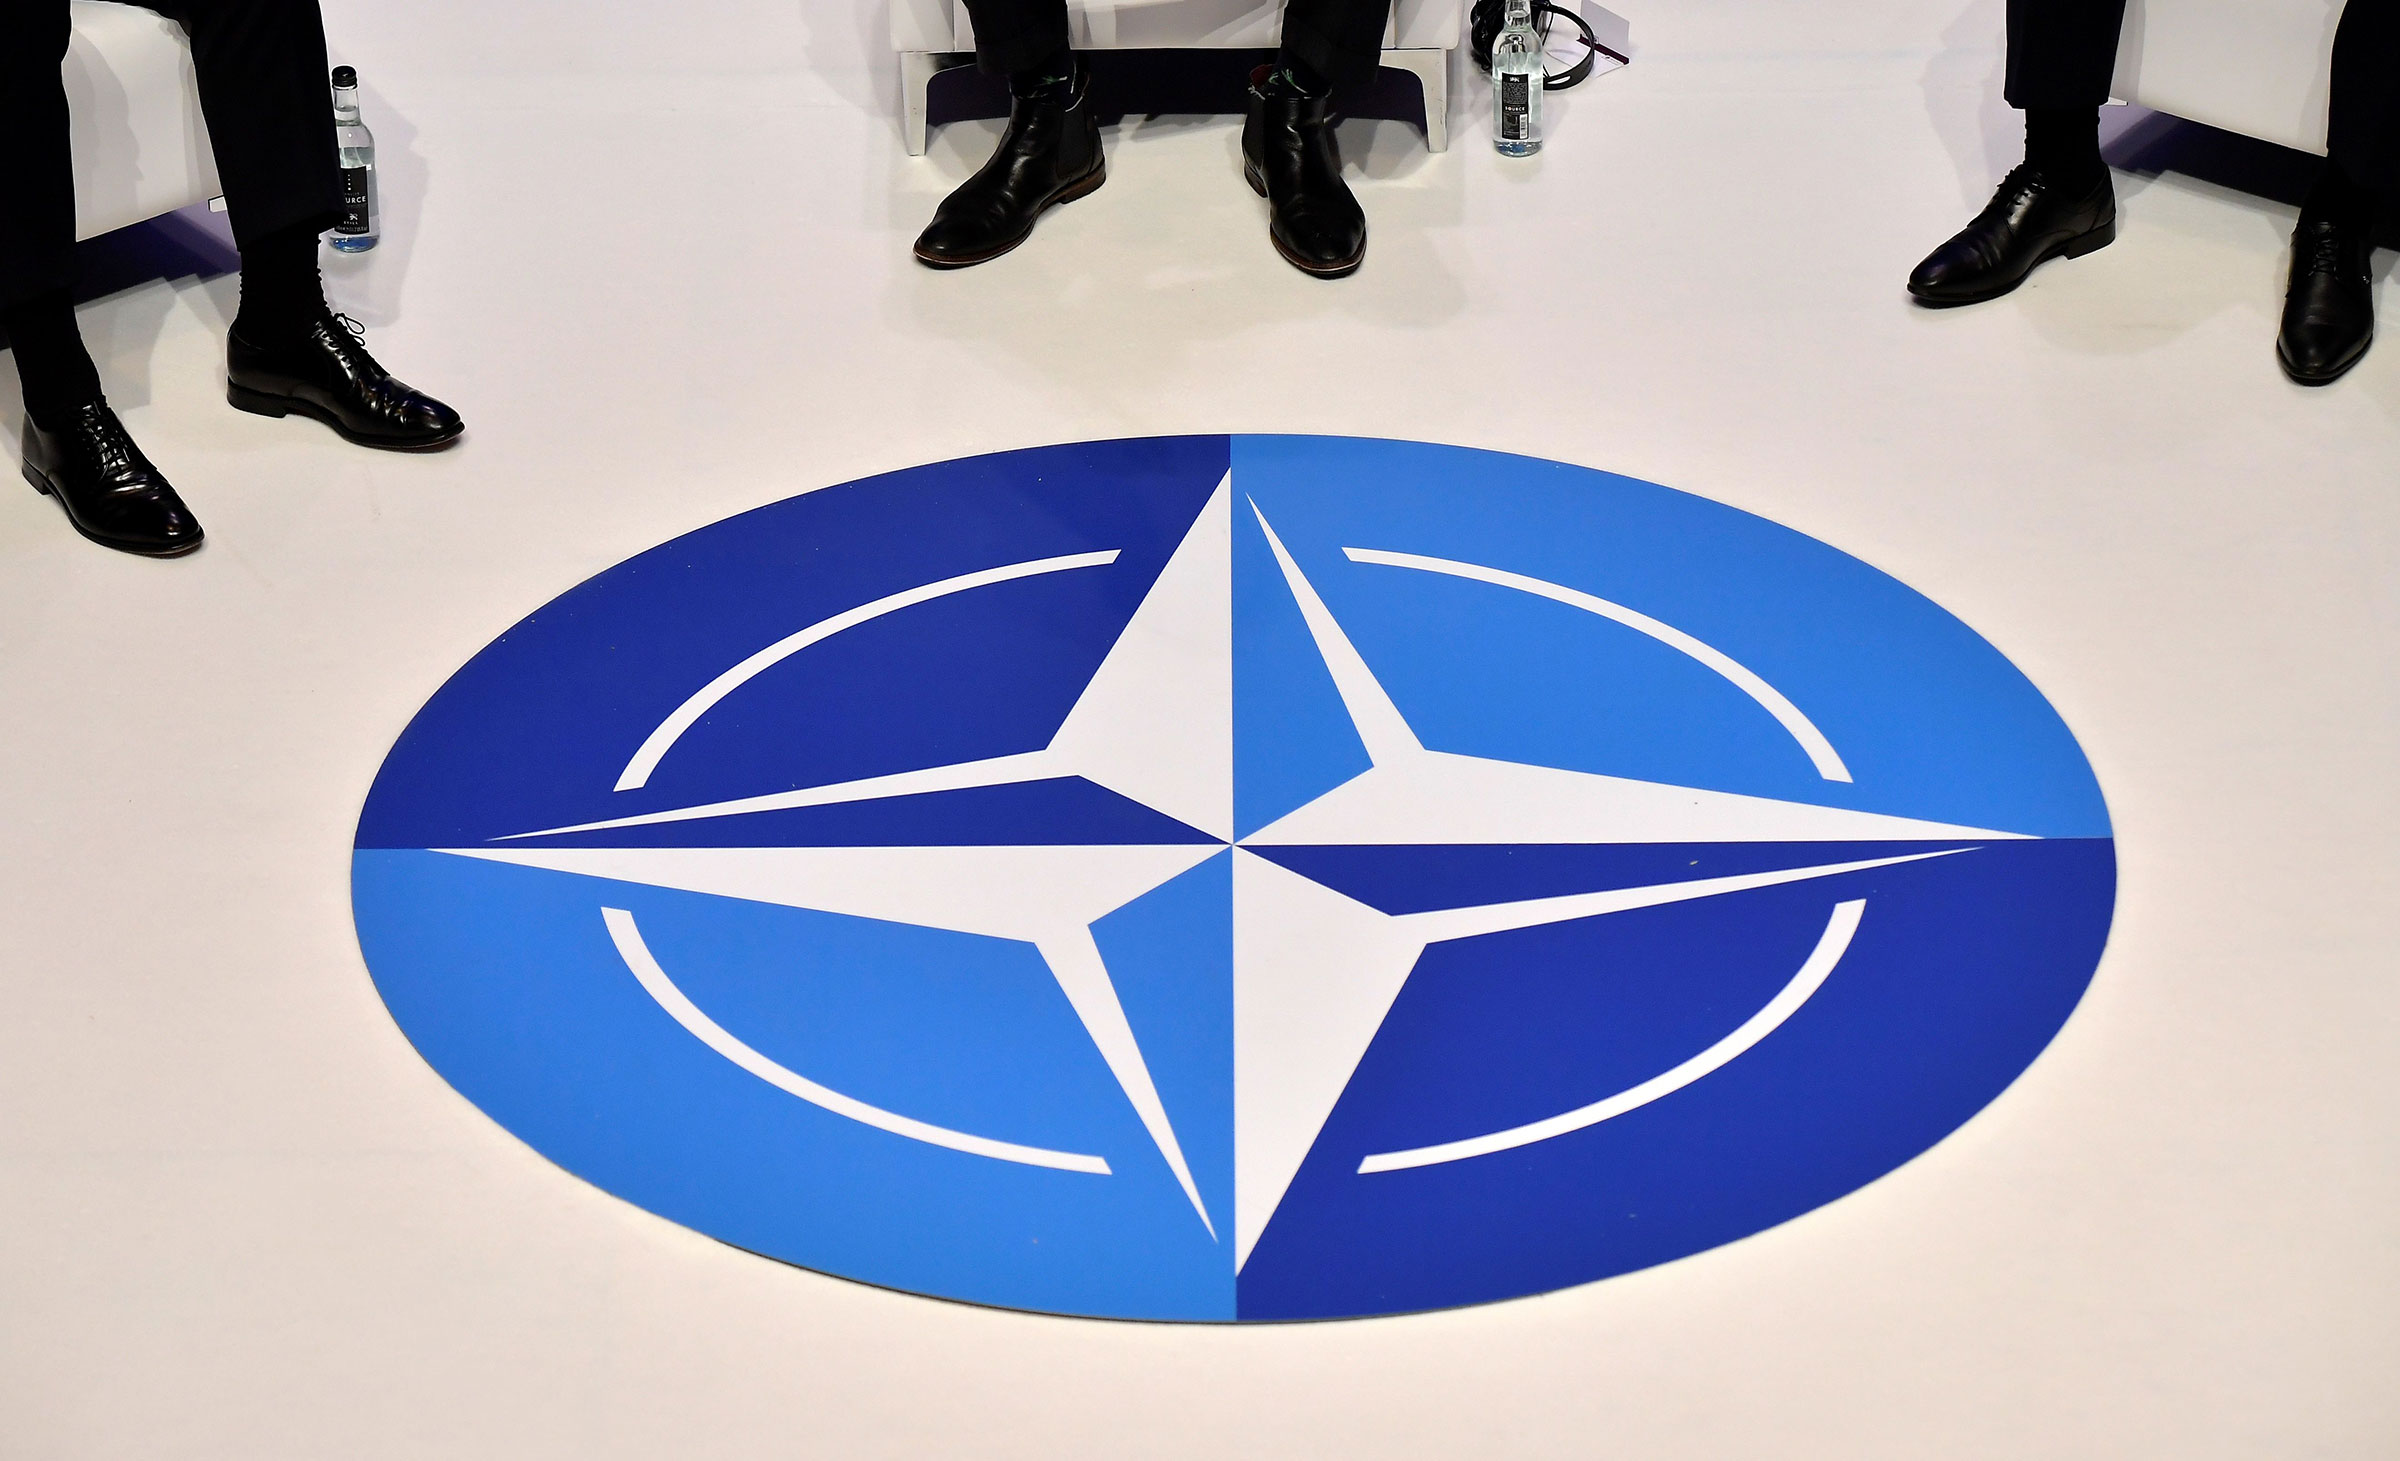 The NATO logo is pictured during a panel discussion prior to the NATO alliance summit in London, Dec. 3, 2019. (Tobias Schwarz—AFP/Getty Images)